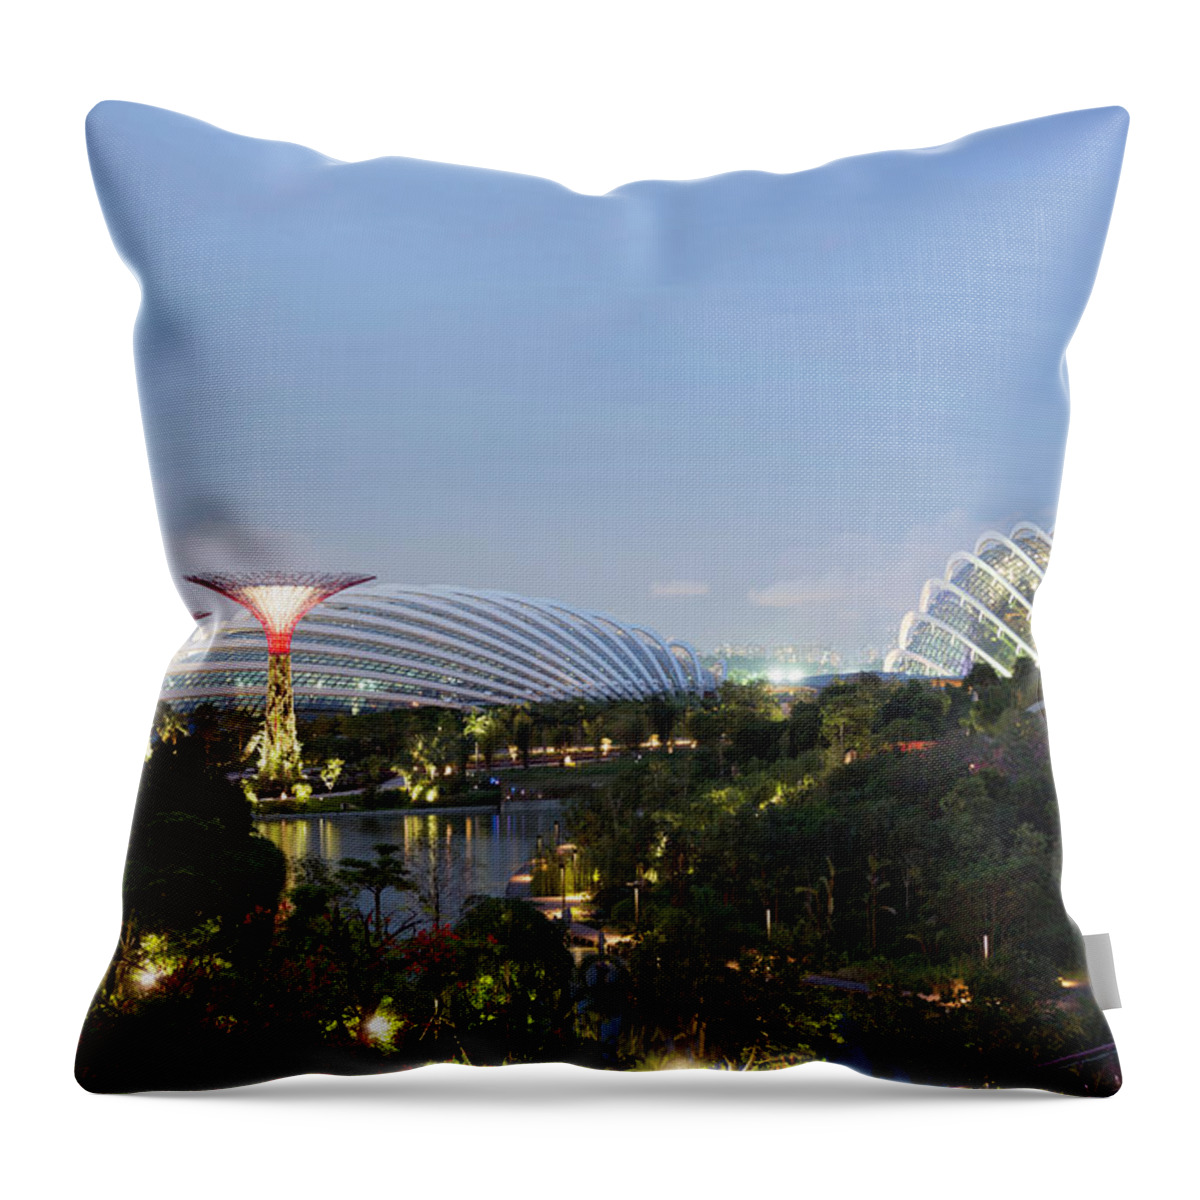 Outdoors Throw Pillow featuring the photograph Supertrees And Conservatories, Gardens by Eternity In An Instant